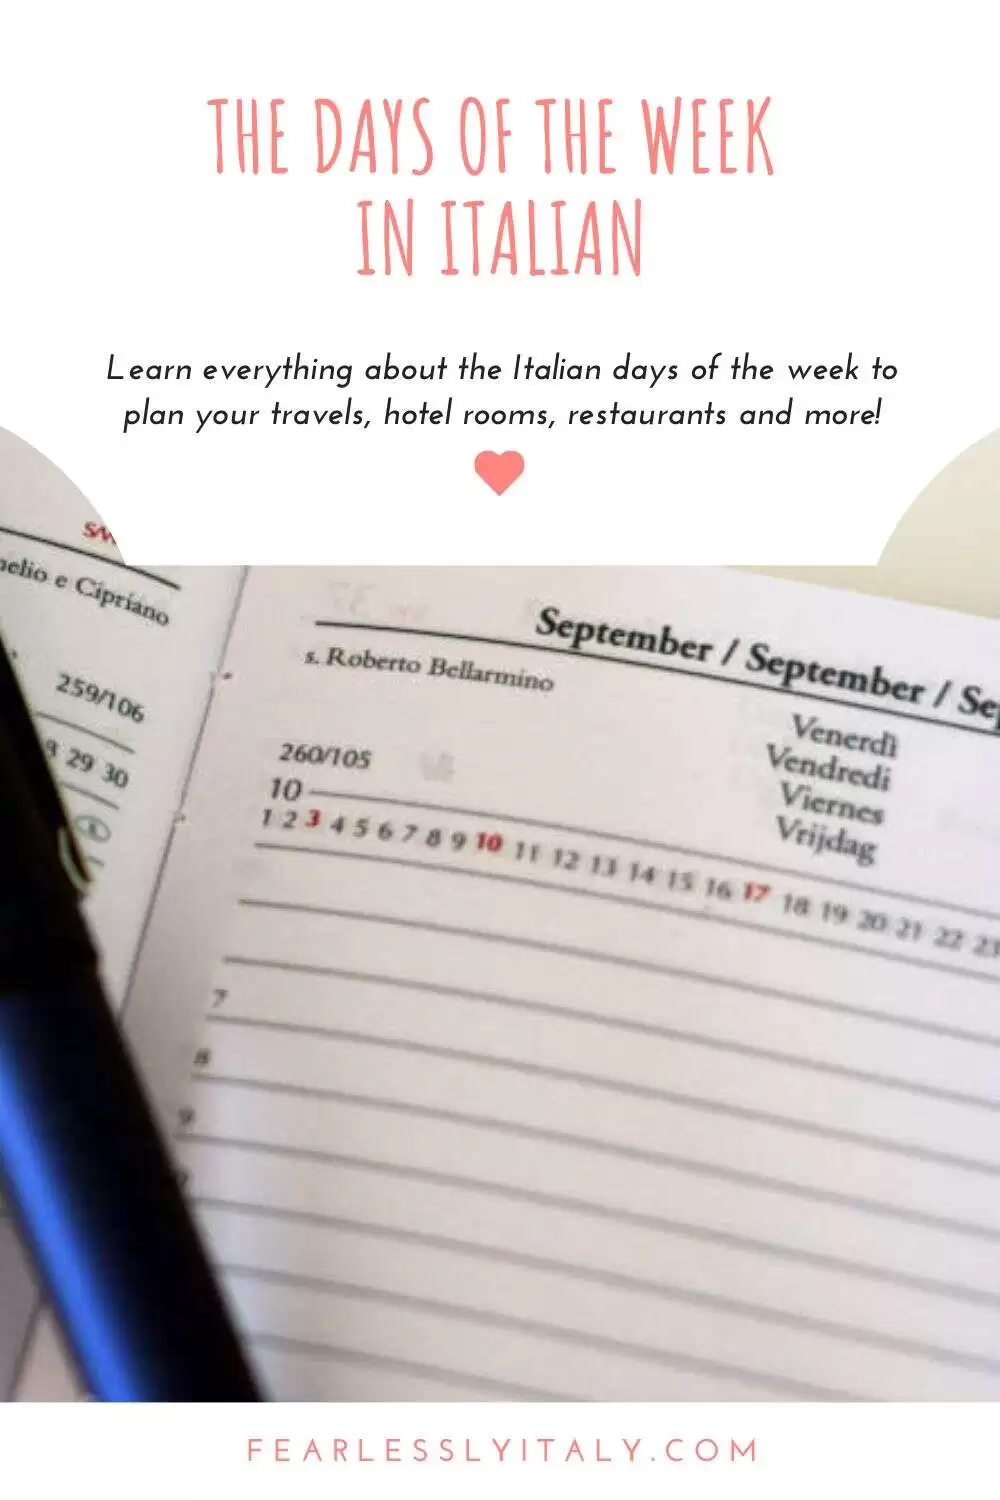 Pinterest image with caption reading "The days of the week in Italian. Learn everything about the Italian days of the week to plan your travels, hotel rooms, restaurants and more."